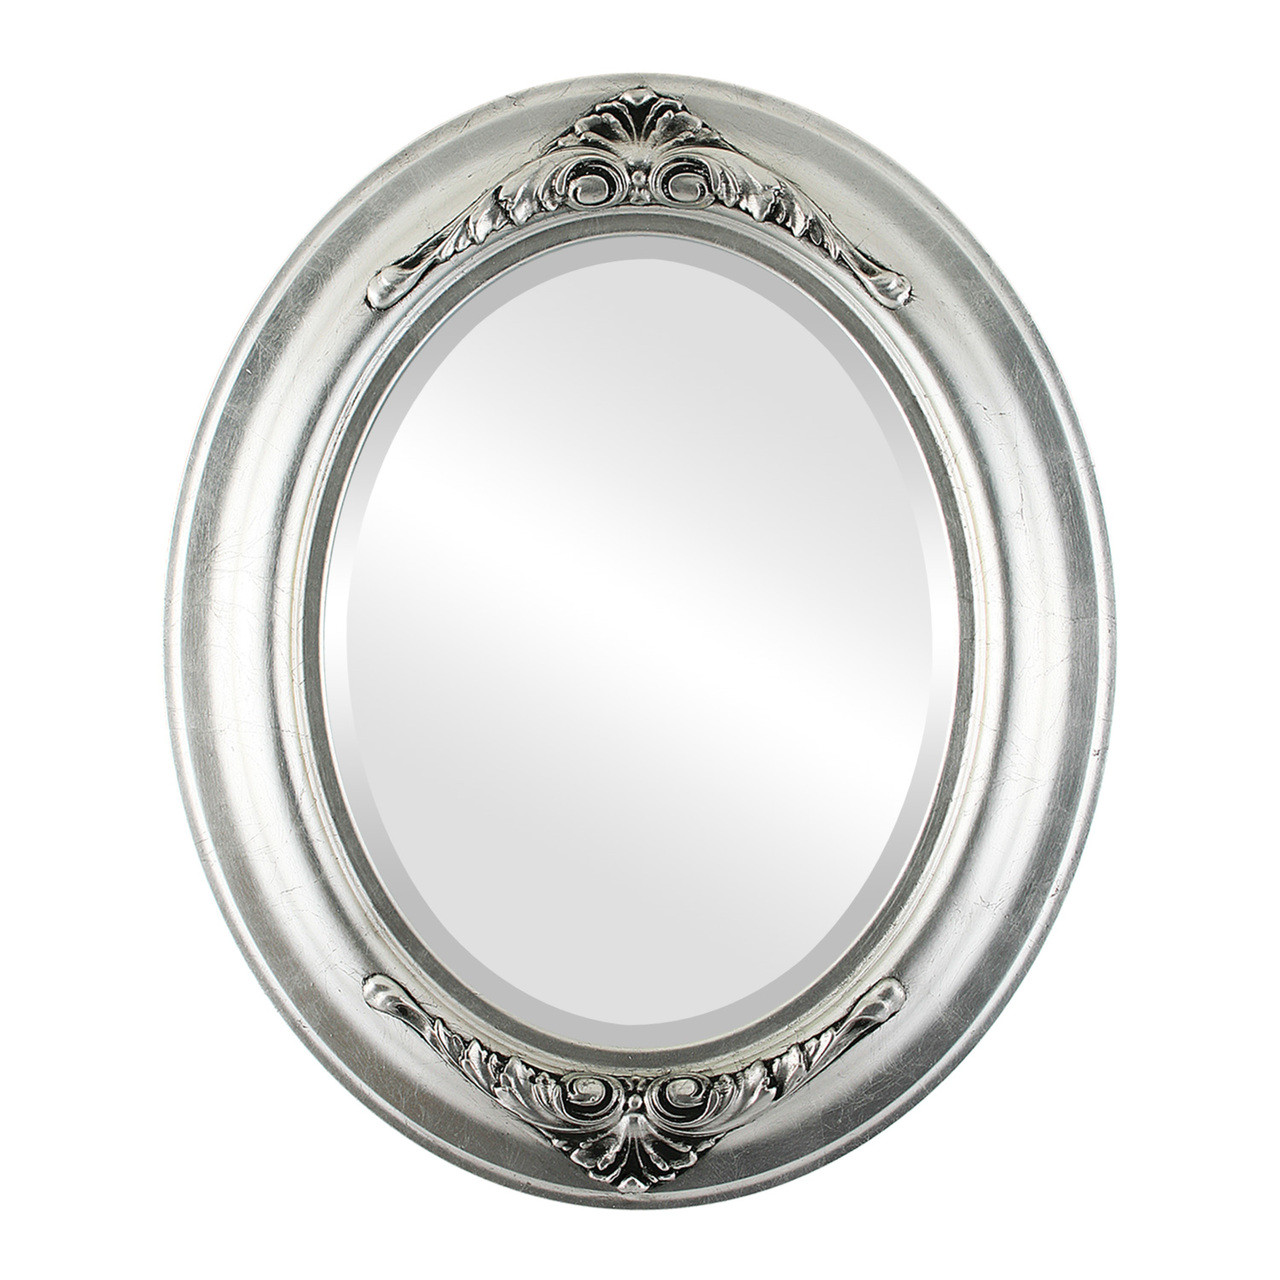 Vintage Silver Oval Mirrors from $164 | Free Shipping